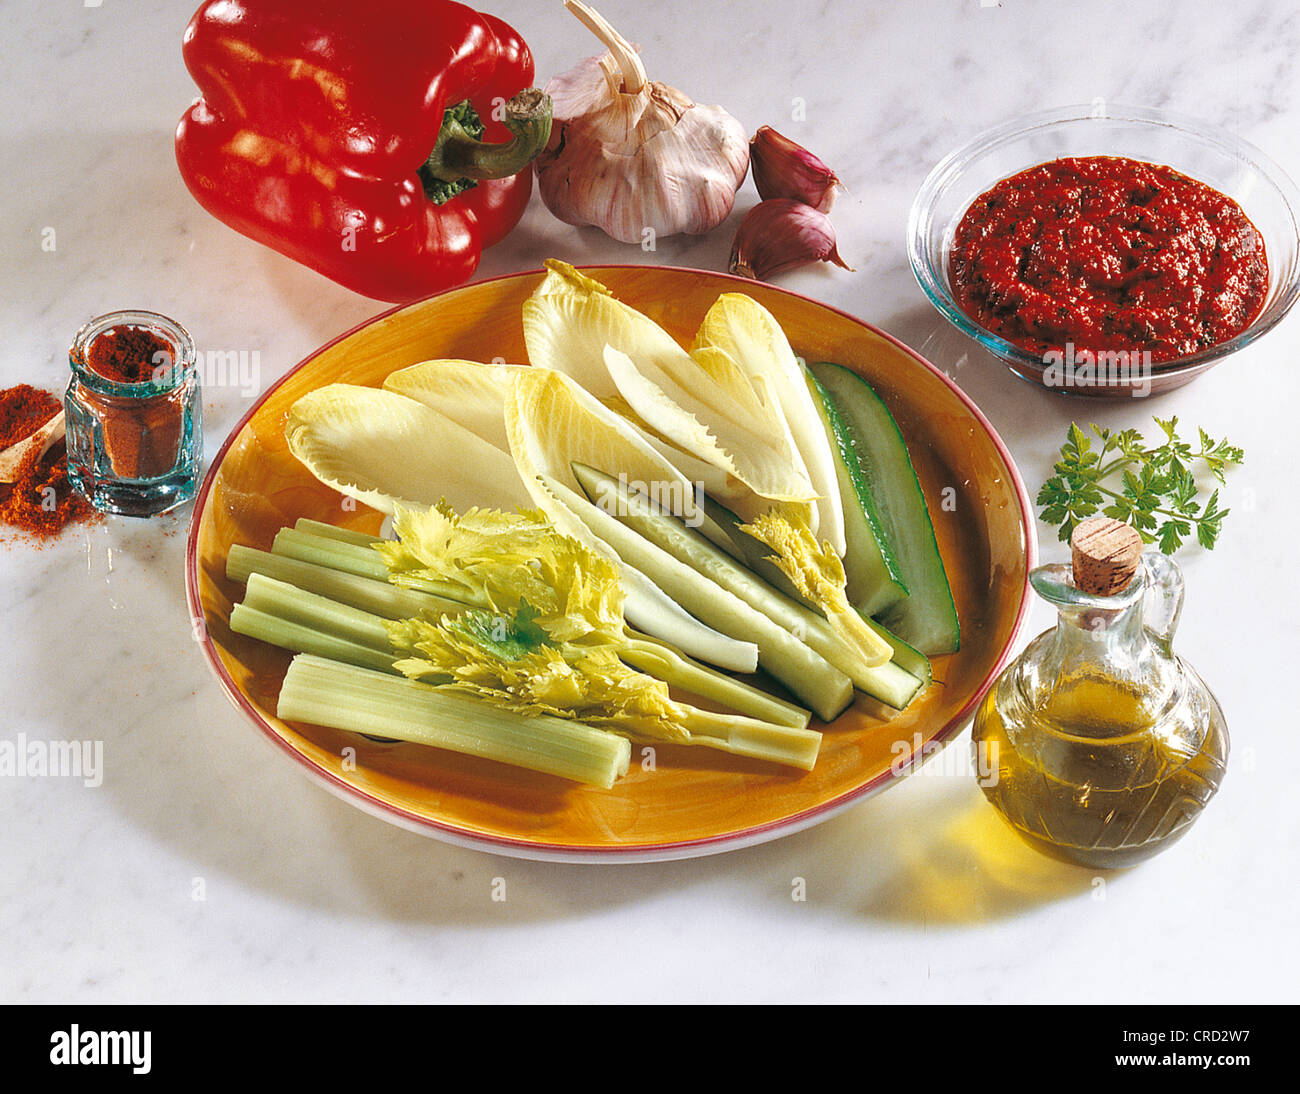 Vegetable salad with a fiery dip, USA. Stock Photo